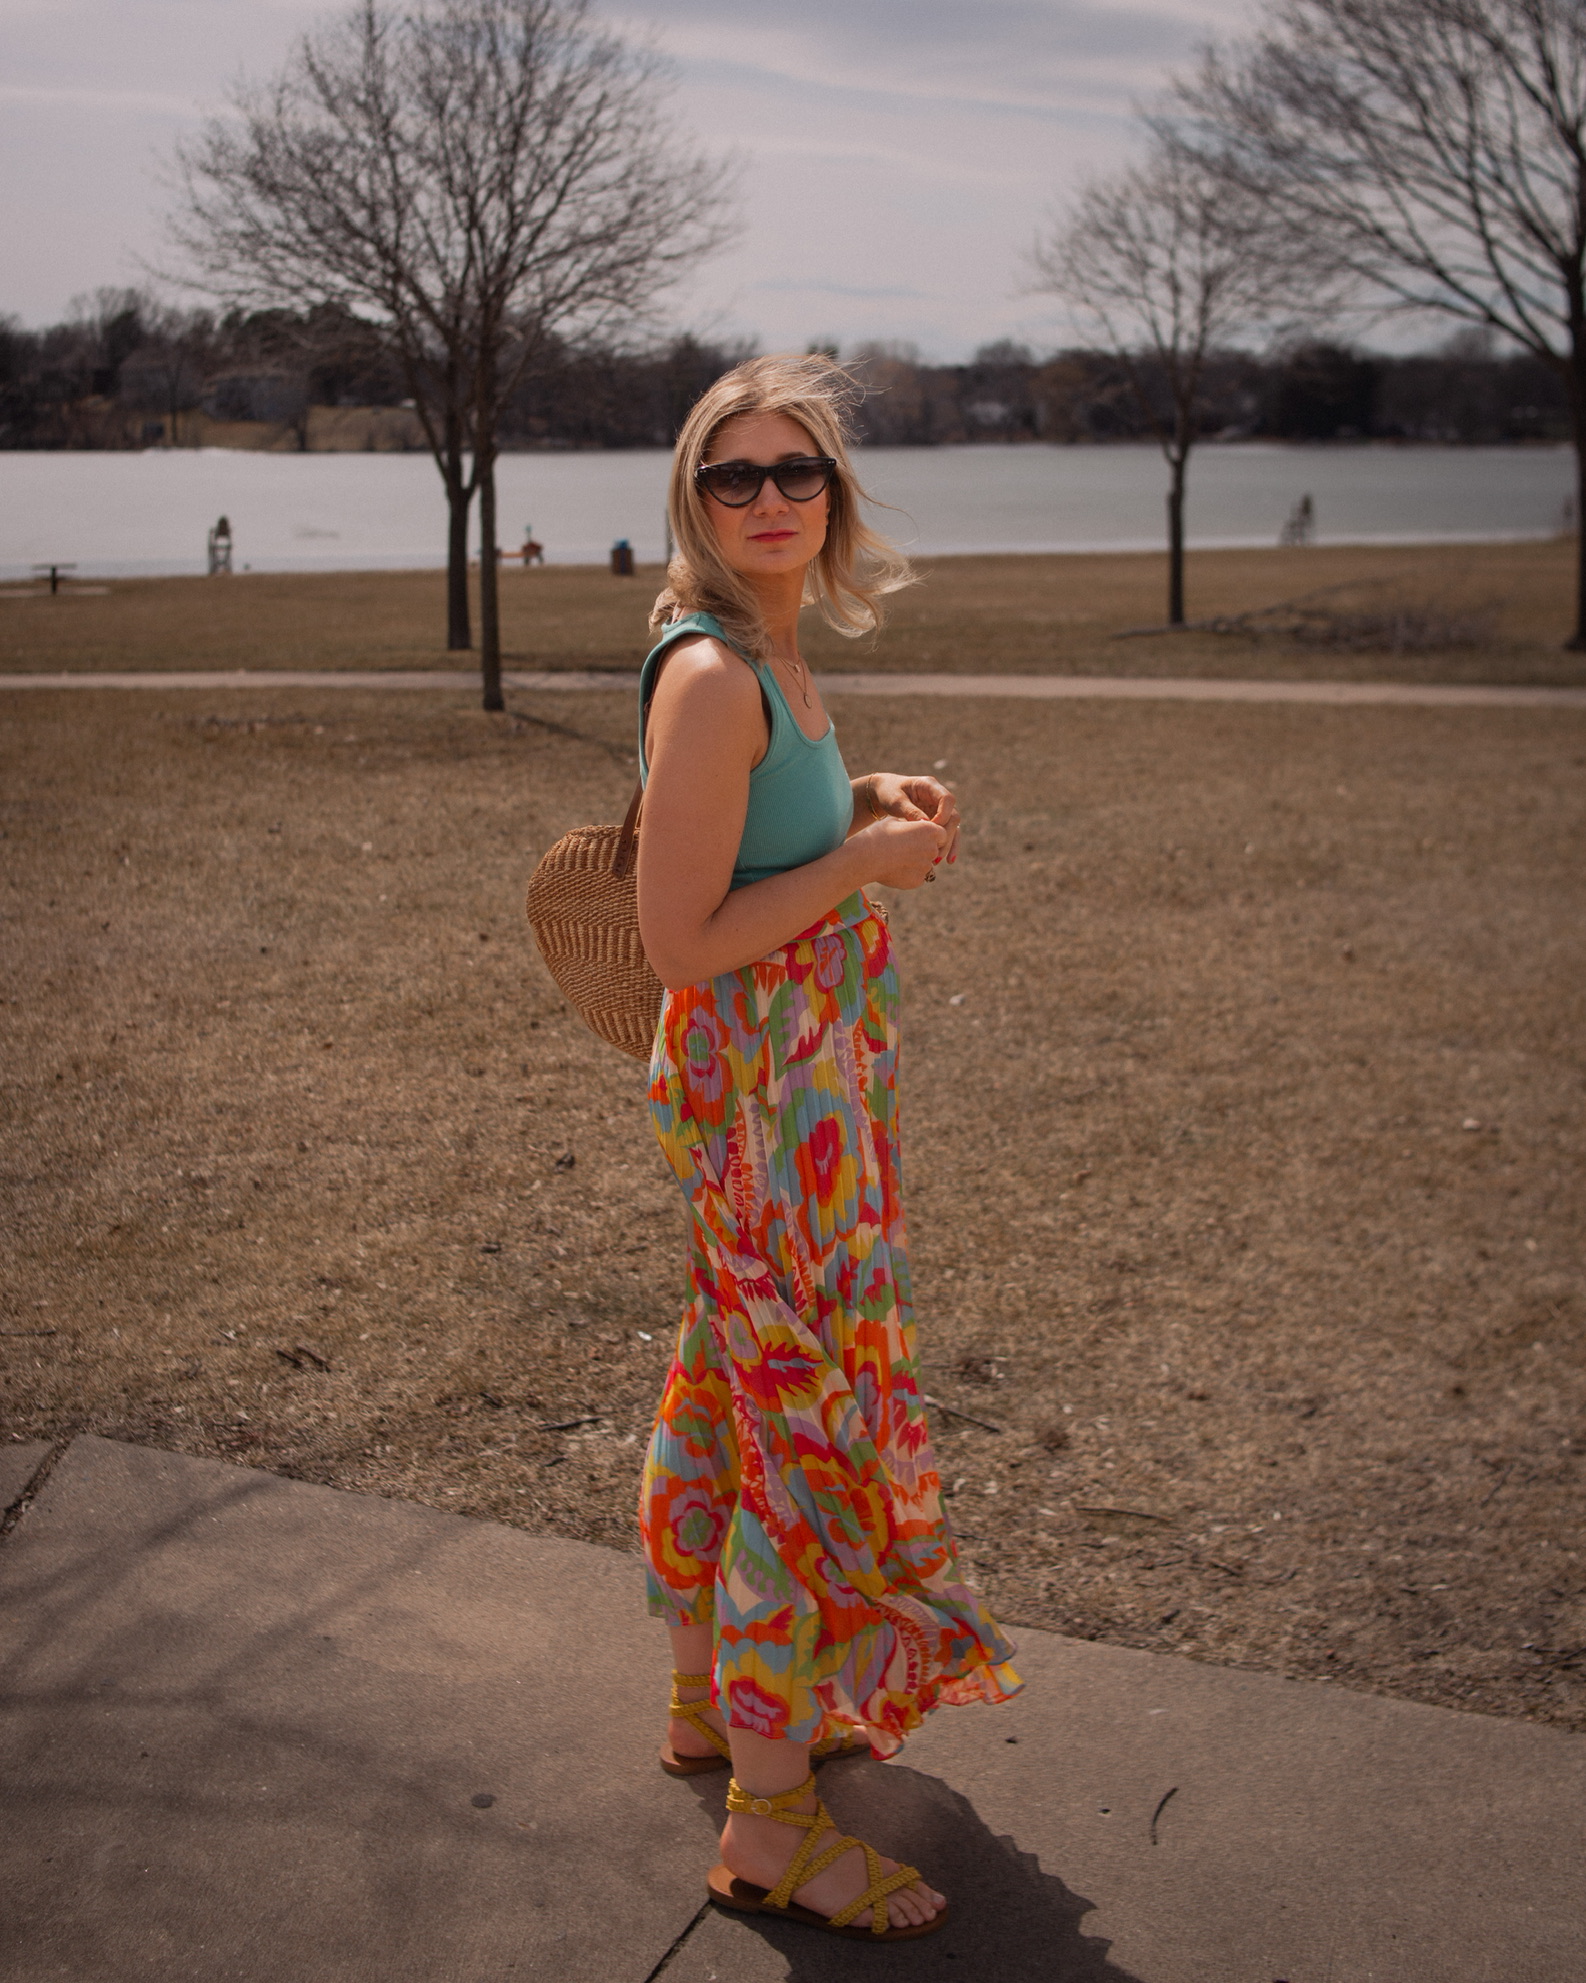 Karin Emily wears a turquoise juan t-shirt from Sezane with A brightly colored floral maxi skirt, yellow sandals, and Isabel Marant Cat Eye Sunglasses